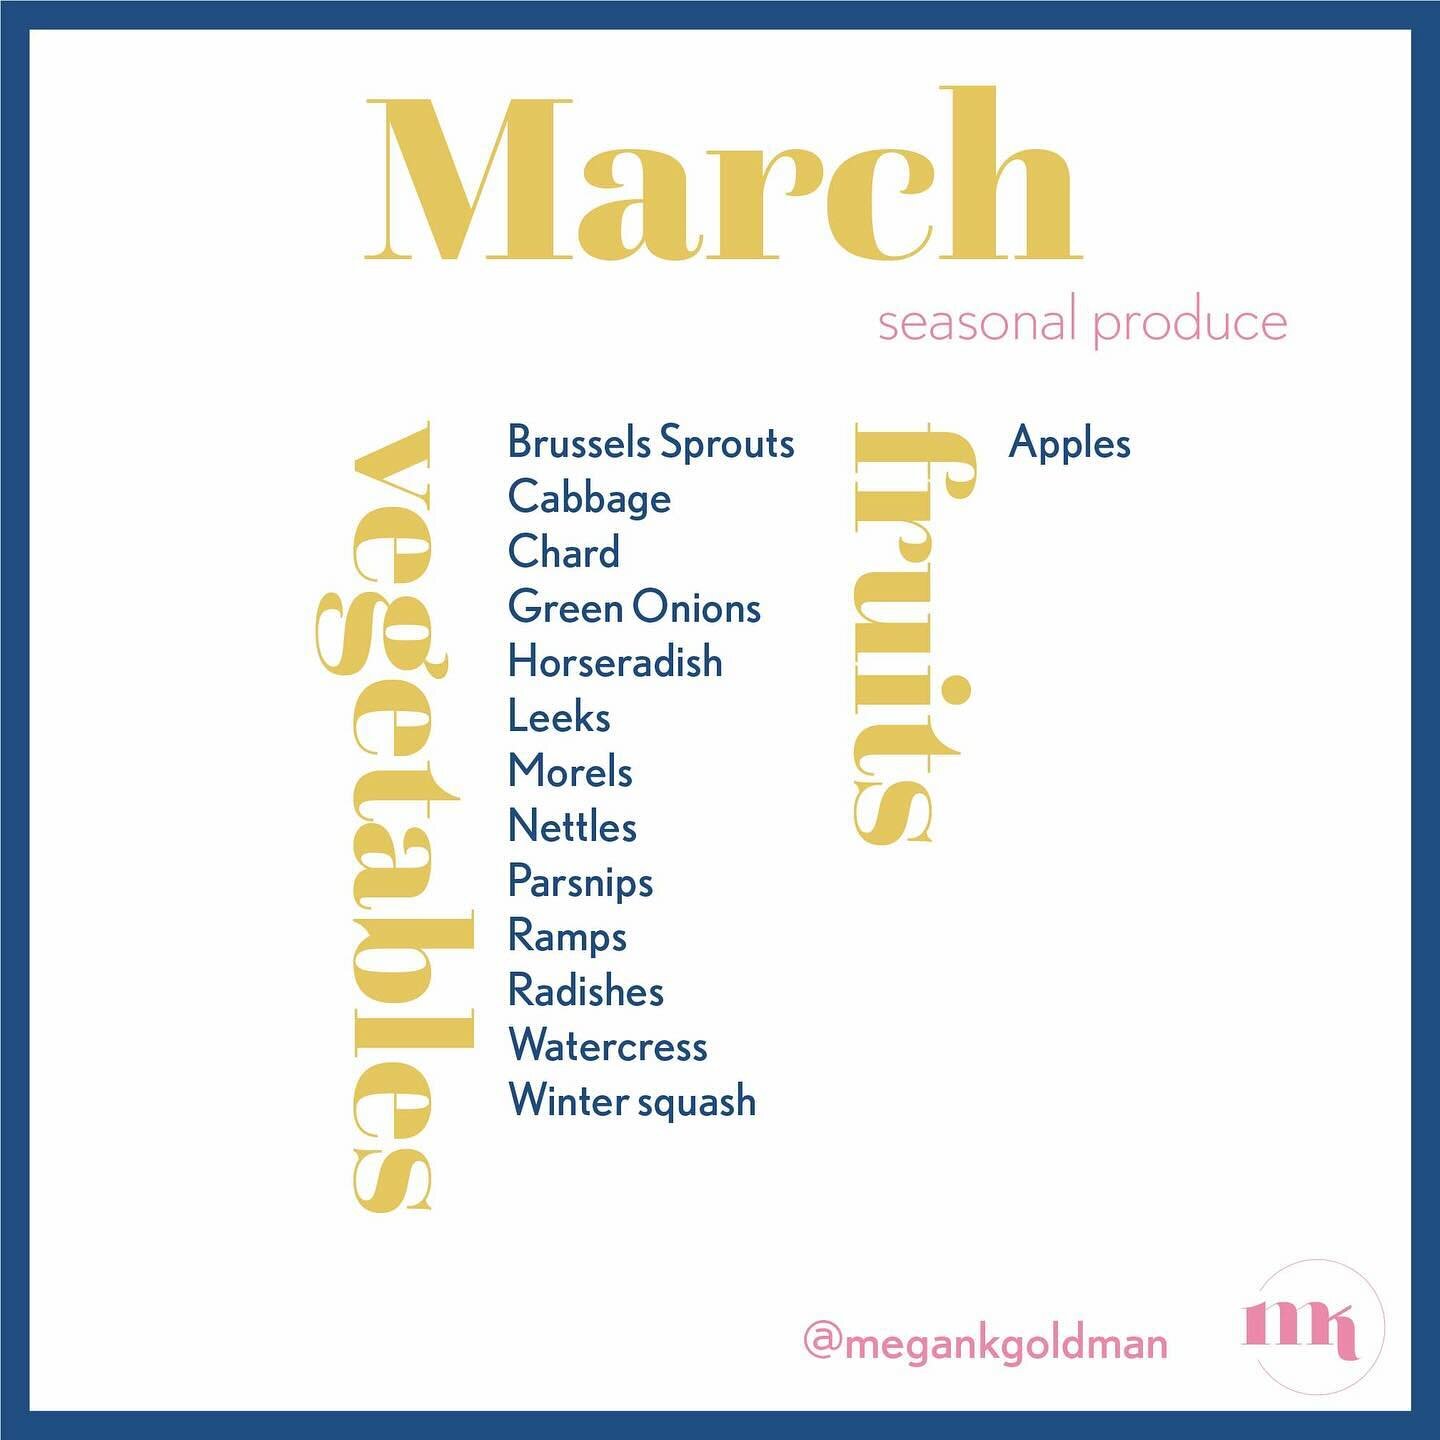 Seasonal Produce, March

Happy March! This is my favorite month, largely in part because it&rsquo;s my birthday month &amp; let&rsquo;s be real, Pisces ♓️ fkn rock! Also, spring is around the corner which means we will see a change in season &amp; in